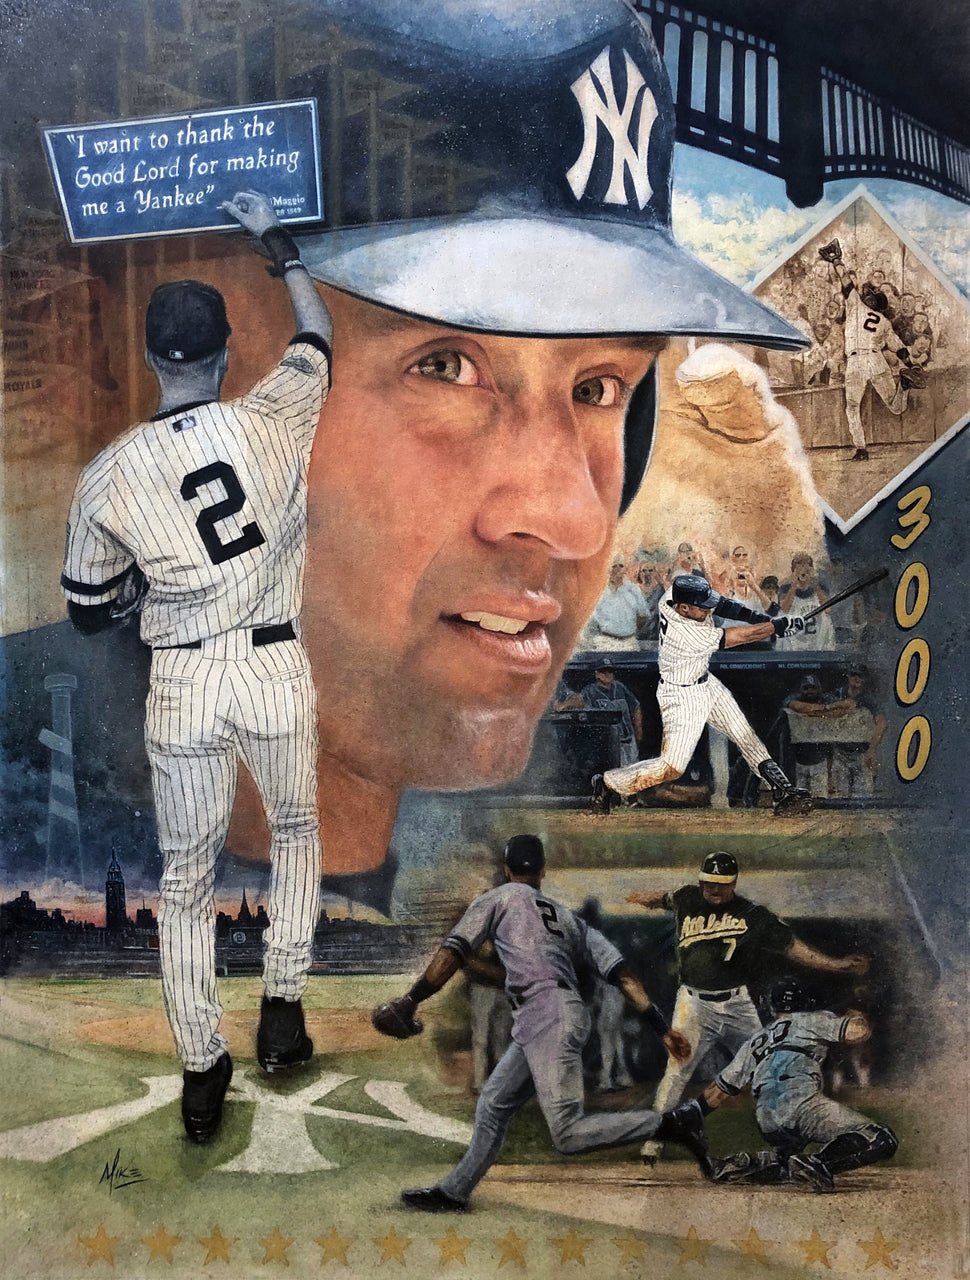 Captain Clutch, A Tribute to the Career of Derek Jeter